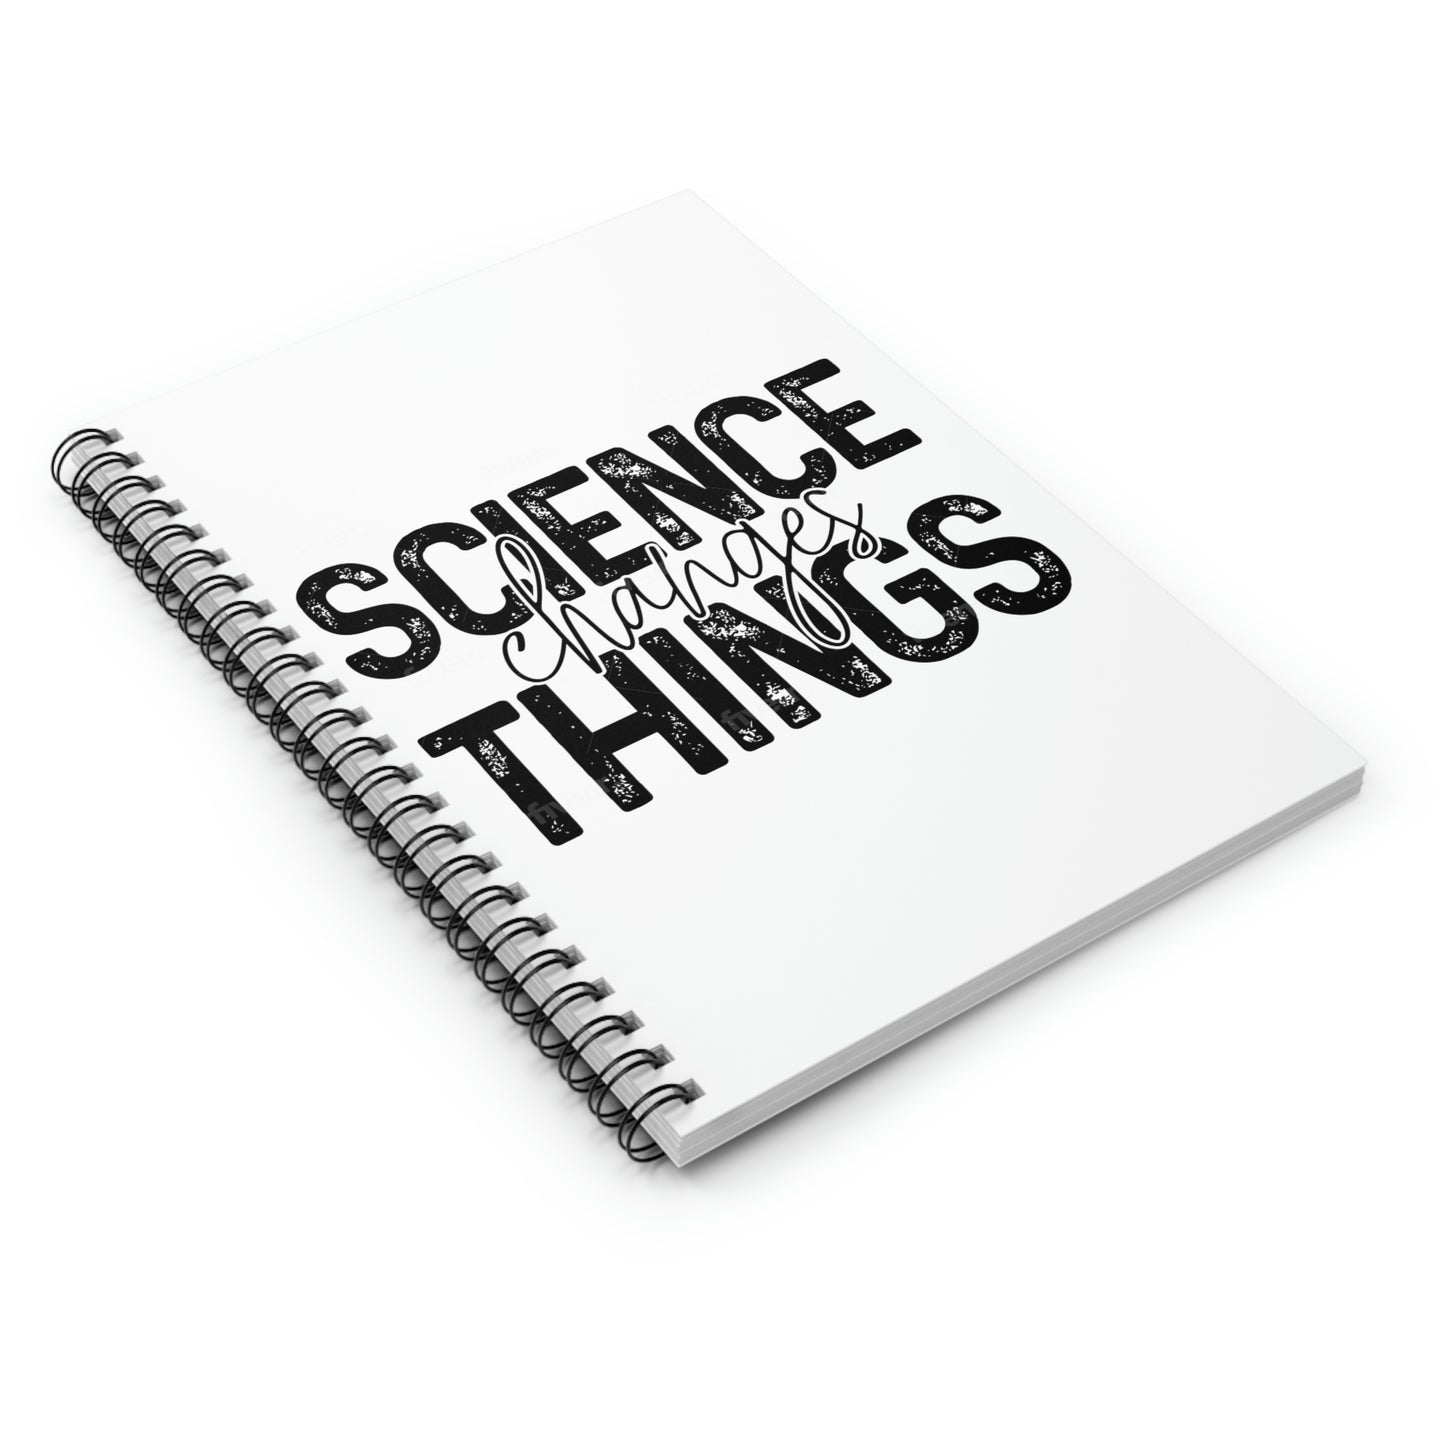 Science Changes Things Spiral Notebook - Ruled Line